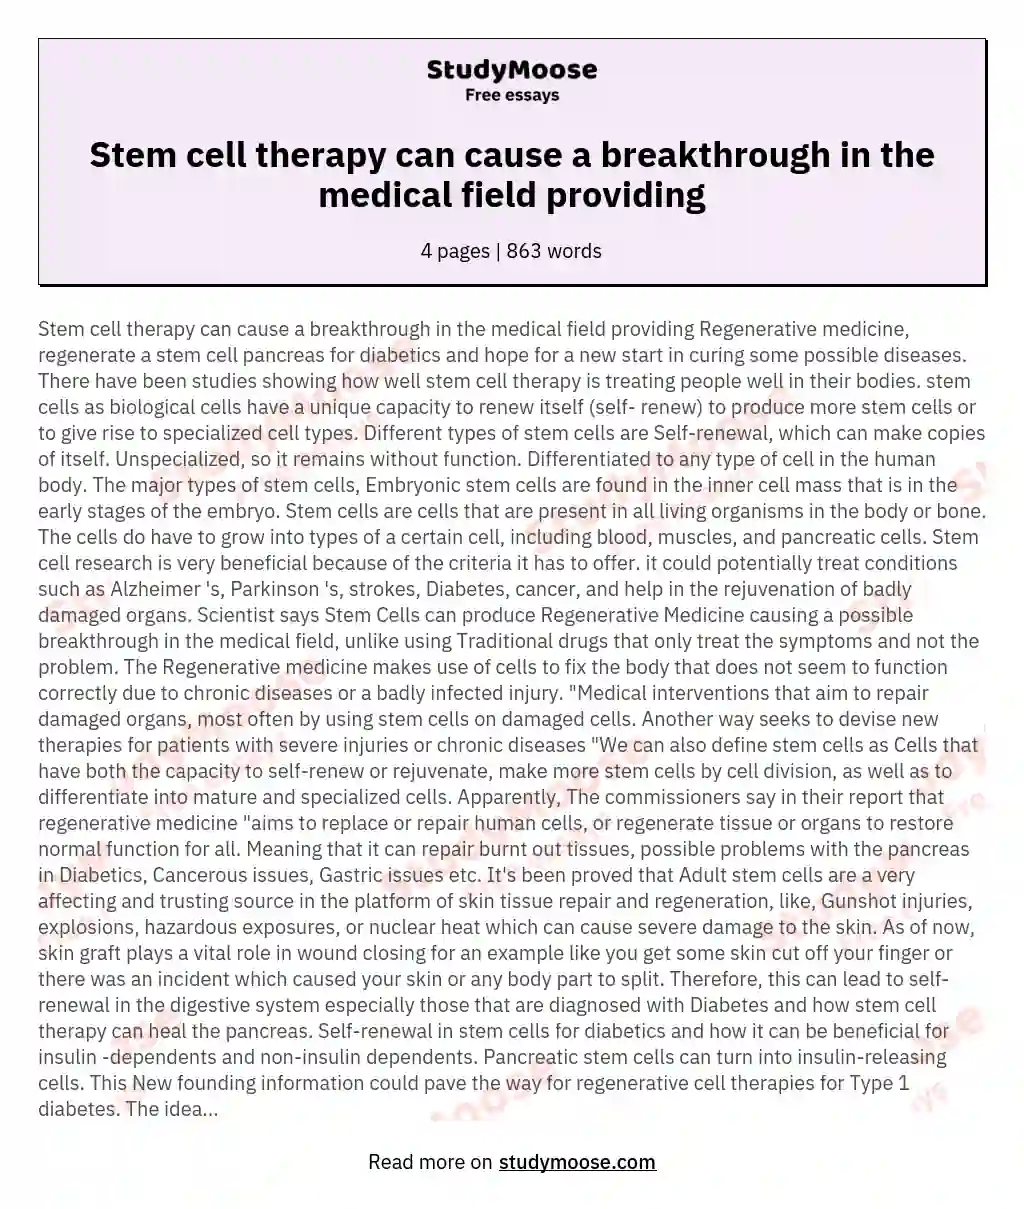 Stem cell therapy can cause a breakthrough in the medical field providing essay